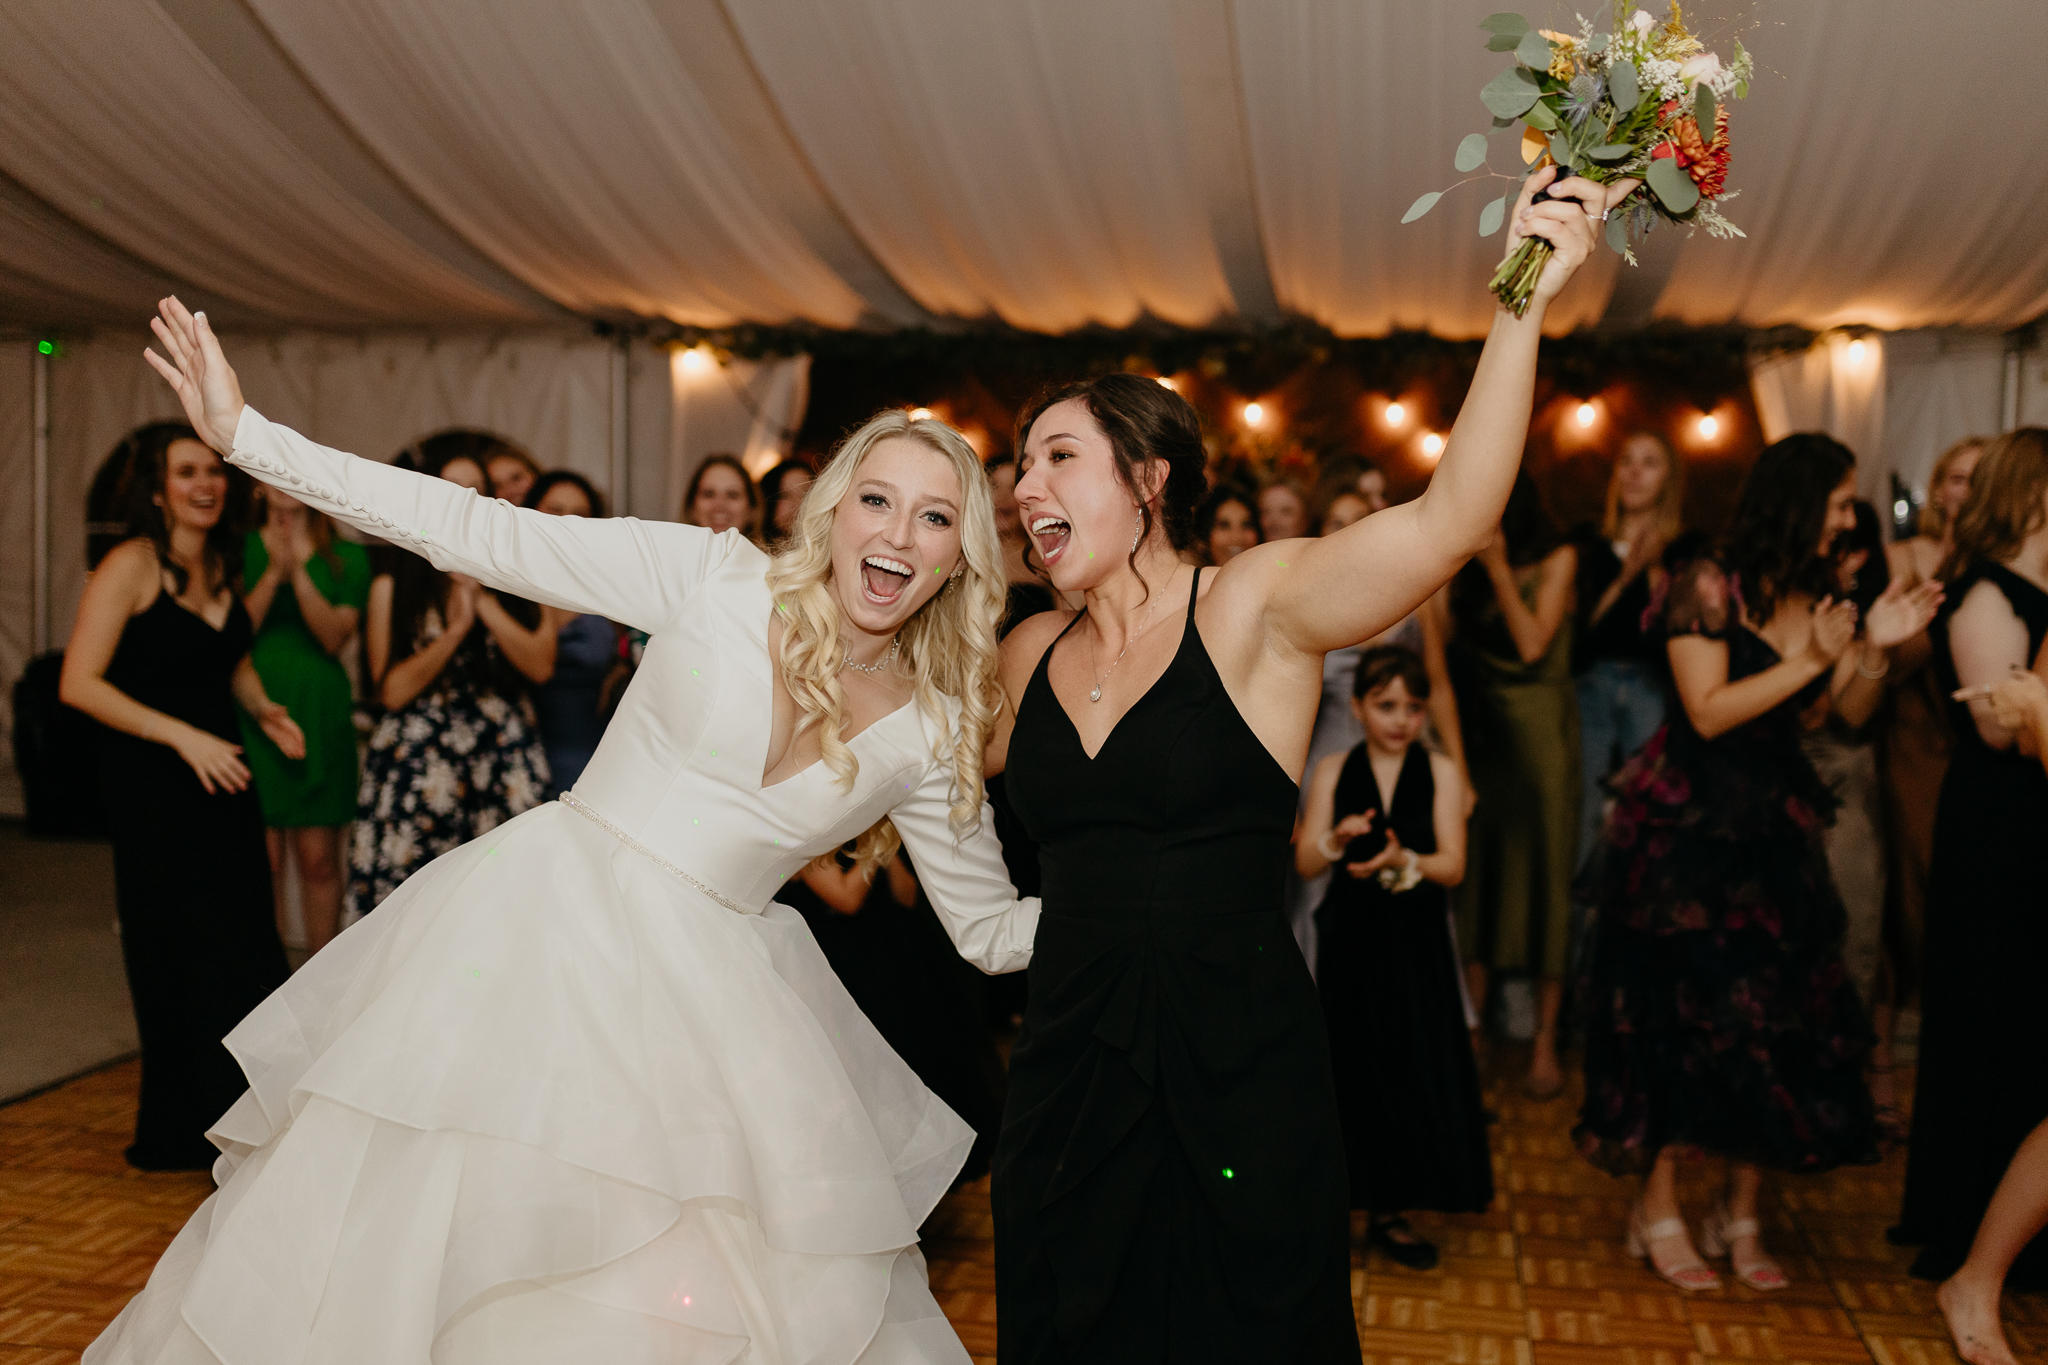 Bride tosses bouquet to all the single women on the dance floor